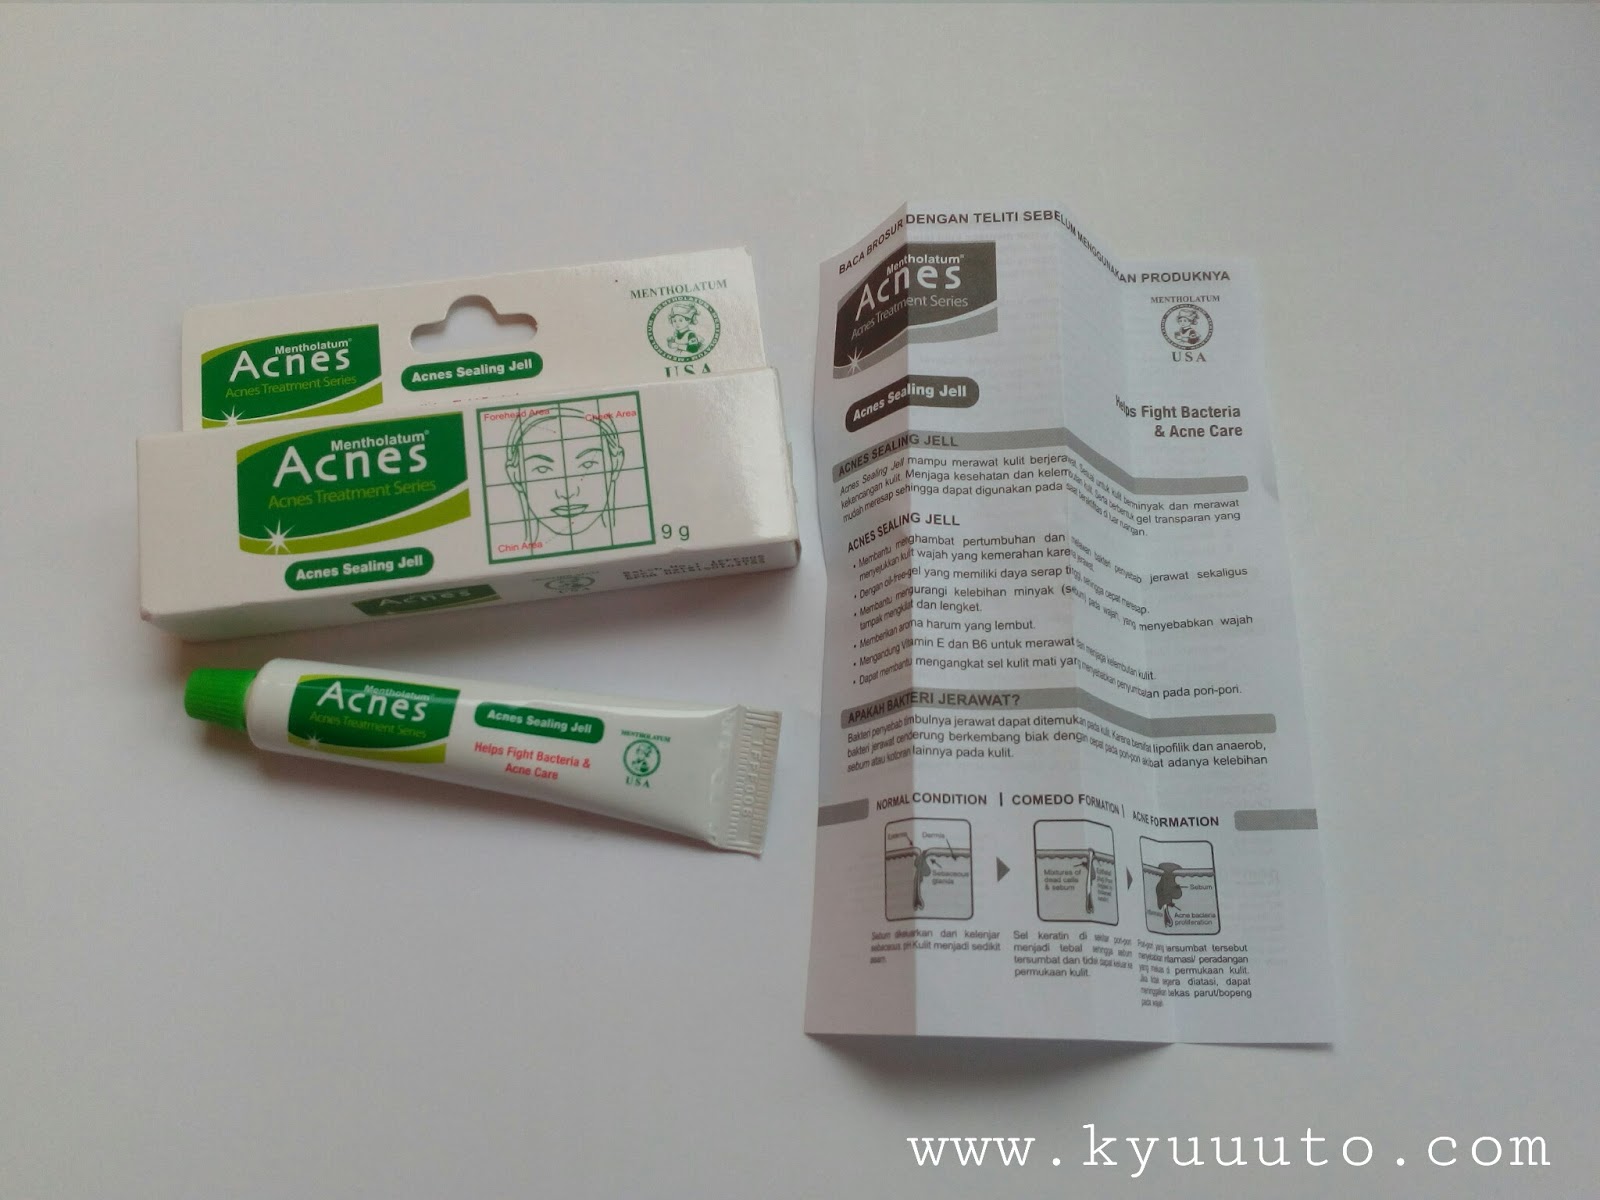 Review Jujur Acnes Sealing Jell Kyuuuto